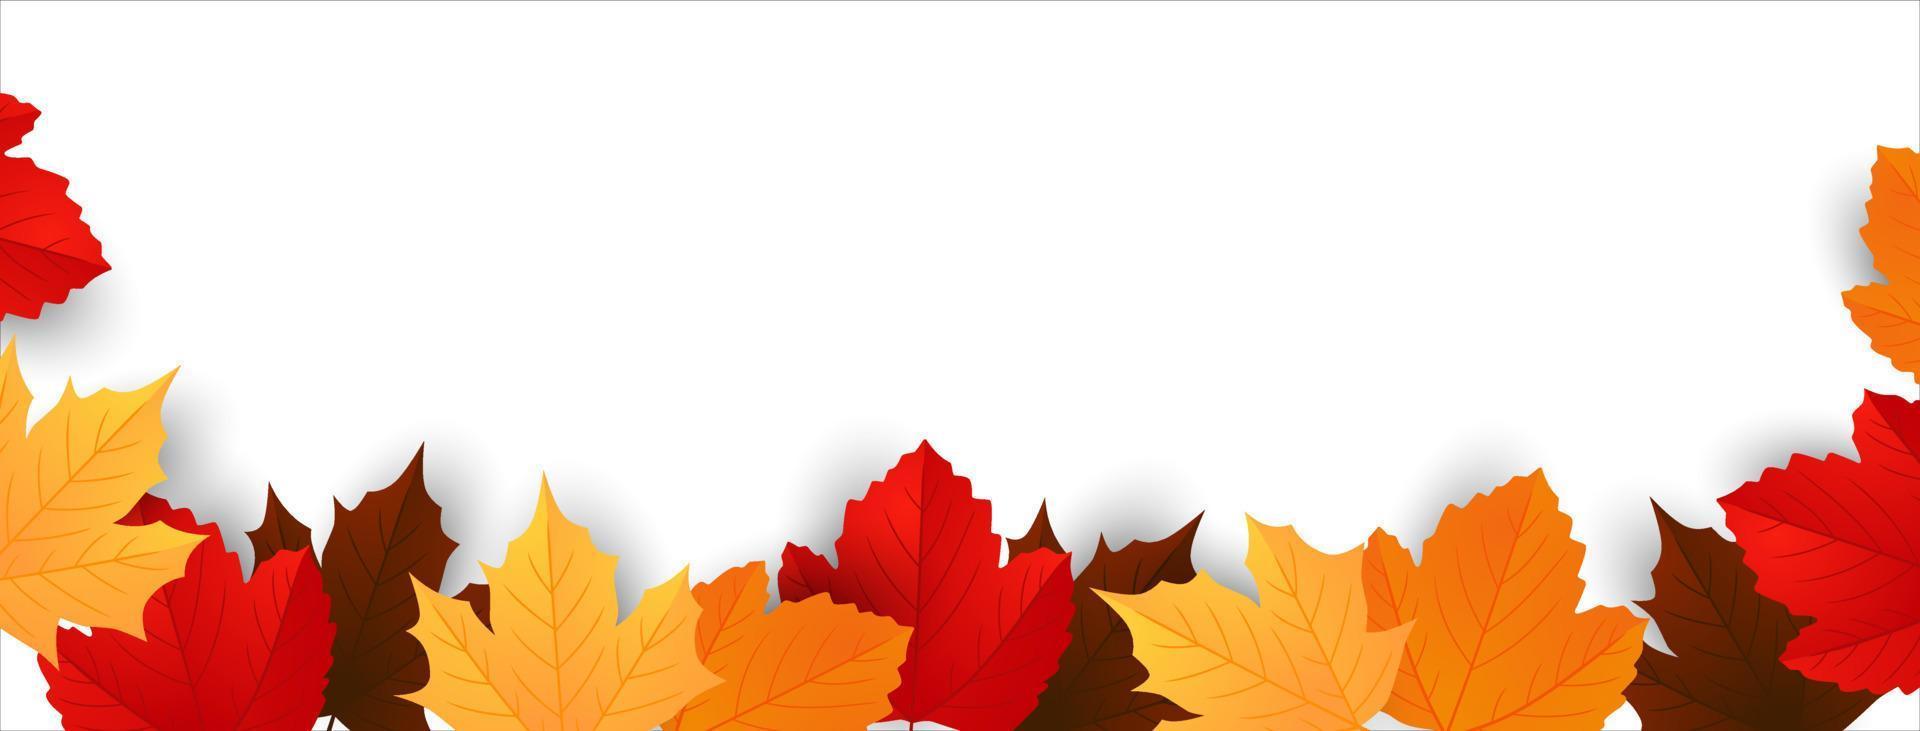 Autumn leaves the background frame with space for text. Banner design for sales, thanksgiving, harvest holidays. Vector illustration